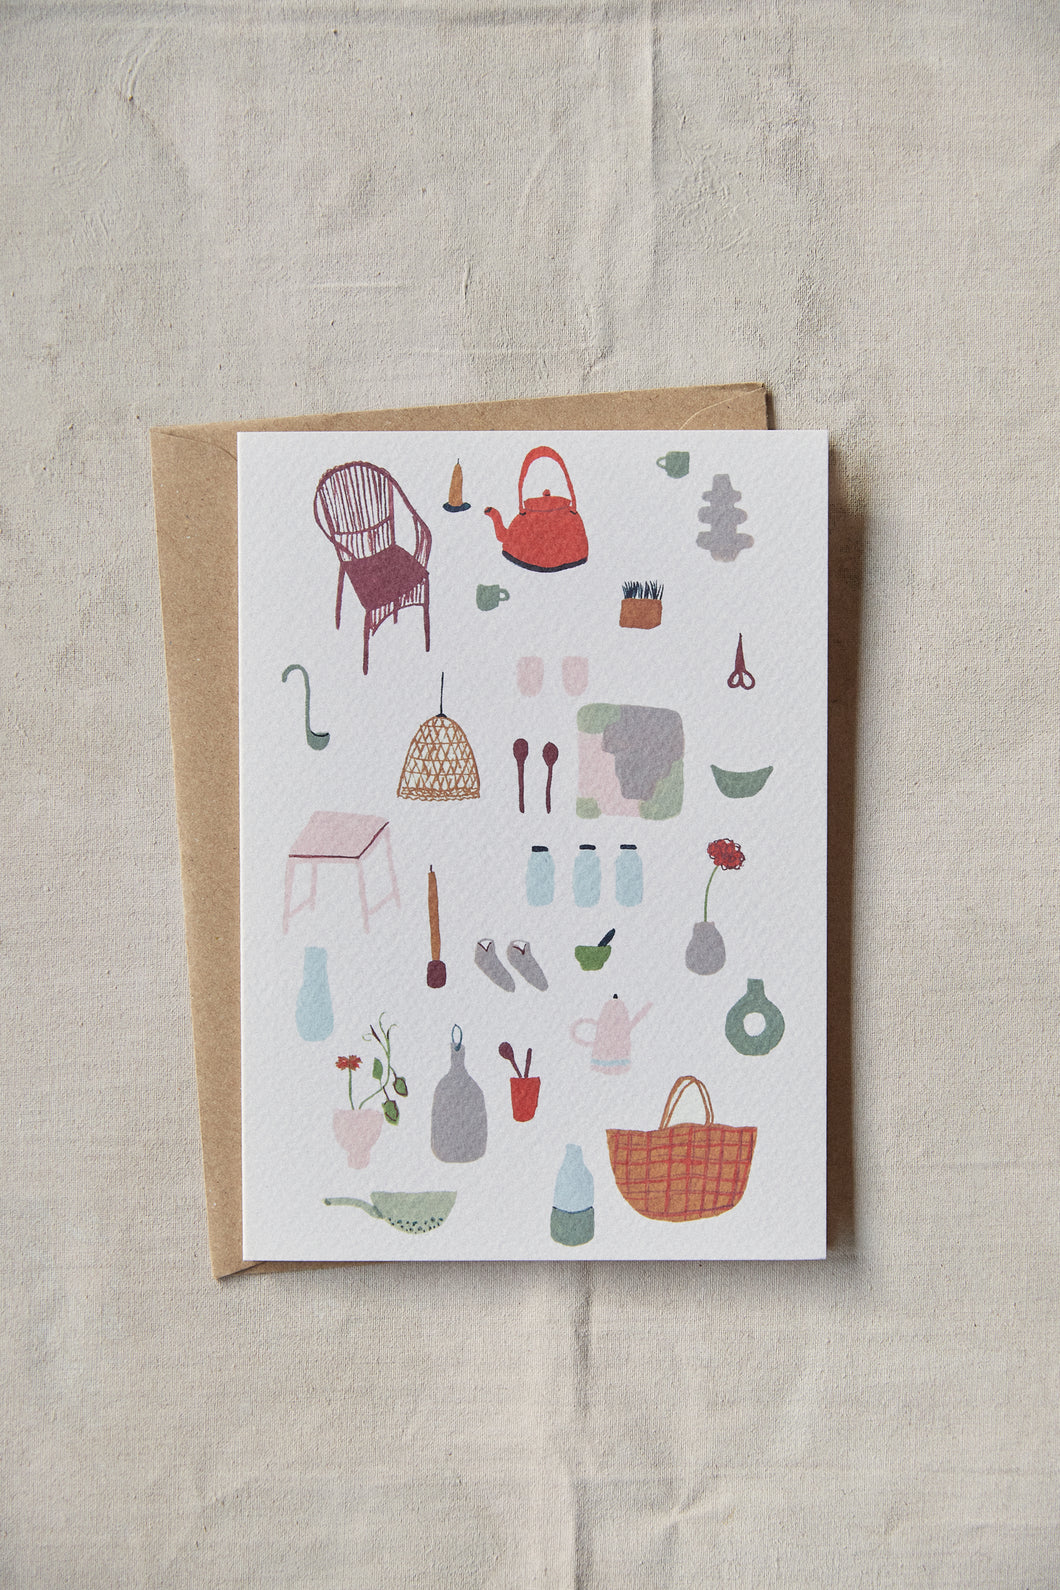 Shop at Settle | Harriet Watson Slow Sunday - charming hand illustrated colour greetings card detailing some of the considered features inside Carriage No. 3 at Settle, on a pale timber background.    